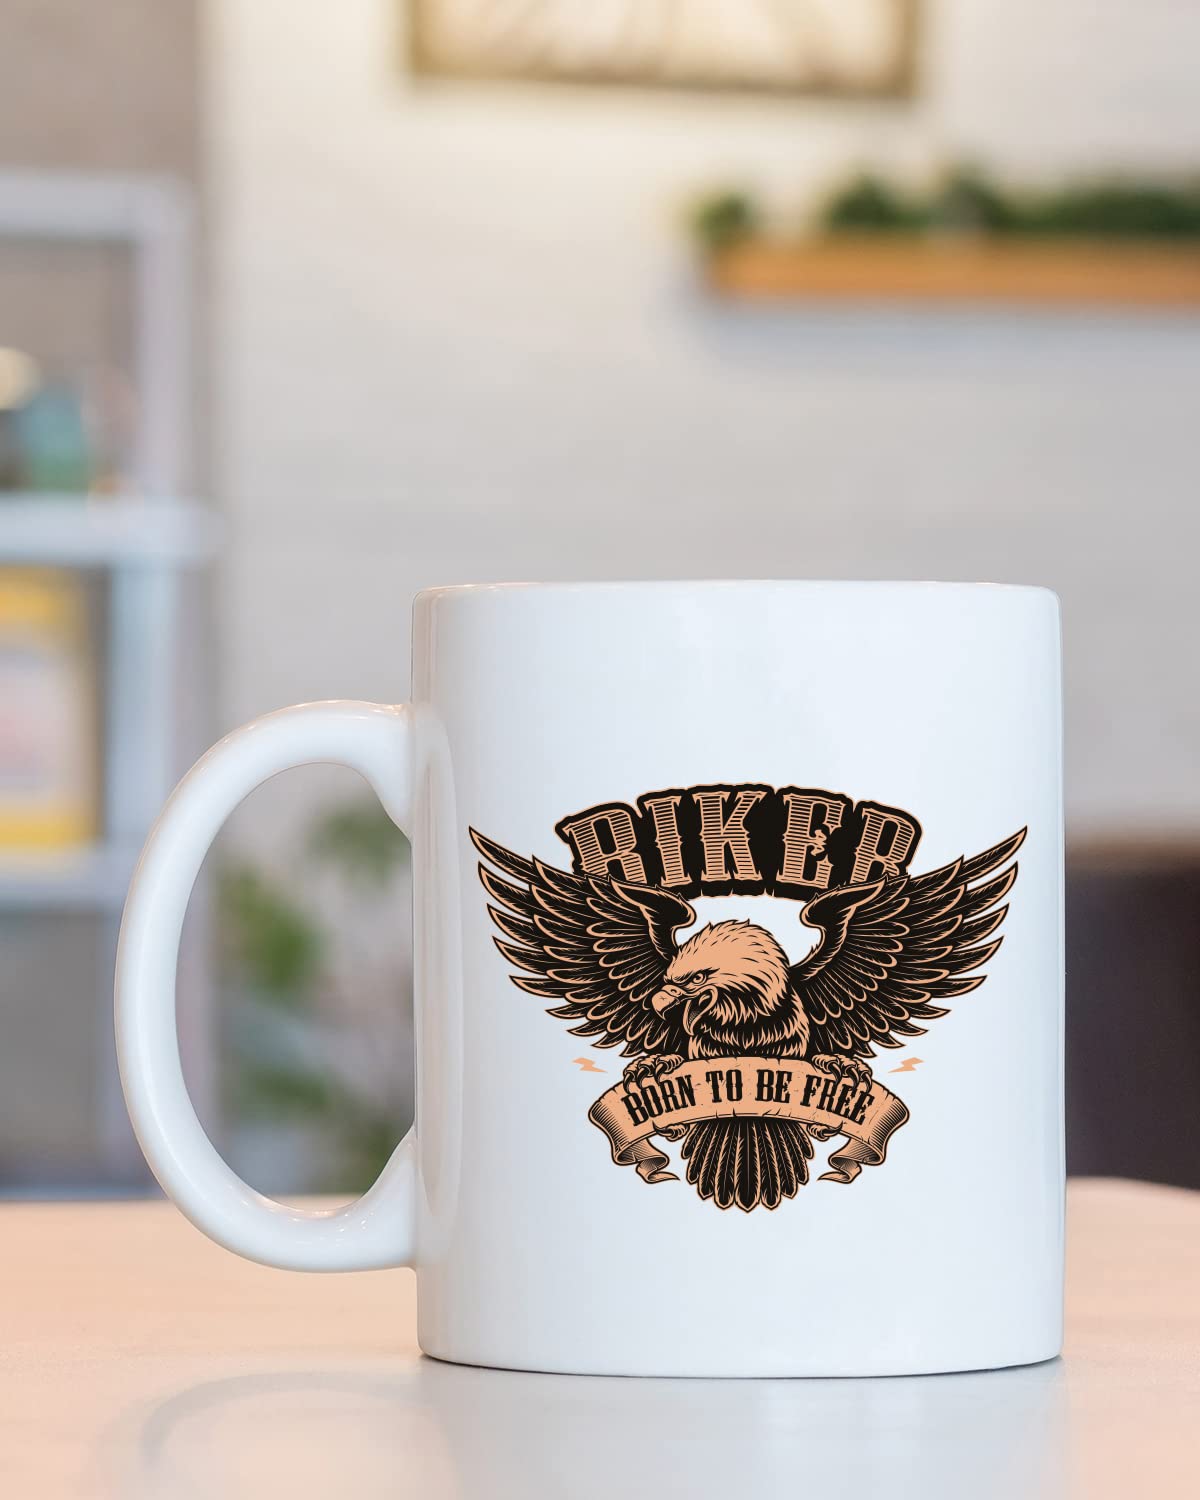 BIKER BORN TO BE FREE Coffee Mug - Unique Gifts For Bikers, Motorcycle Personalized Mugs, Gifts For Motorcycle Lovers, Bike Quotes Mug for Husband Boyfriend Birthday, Valentine Mugs for Him